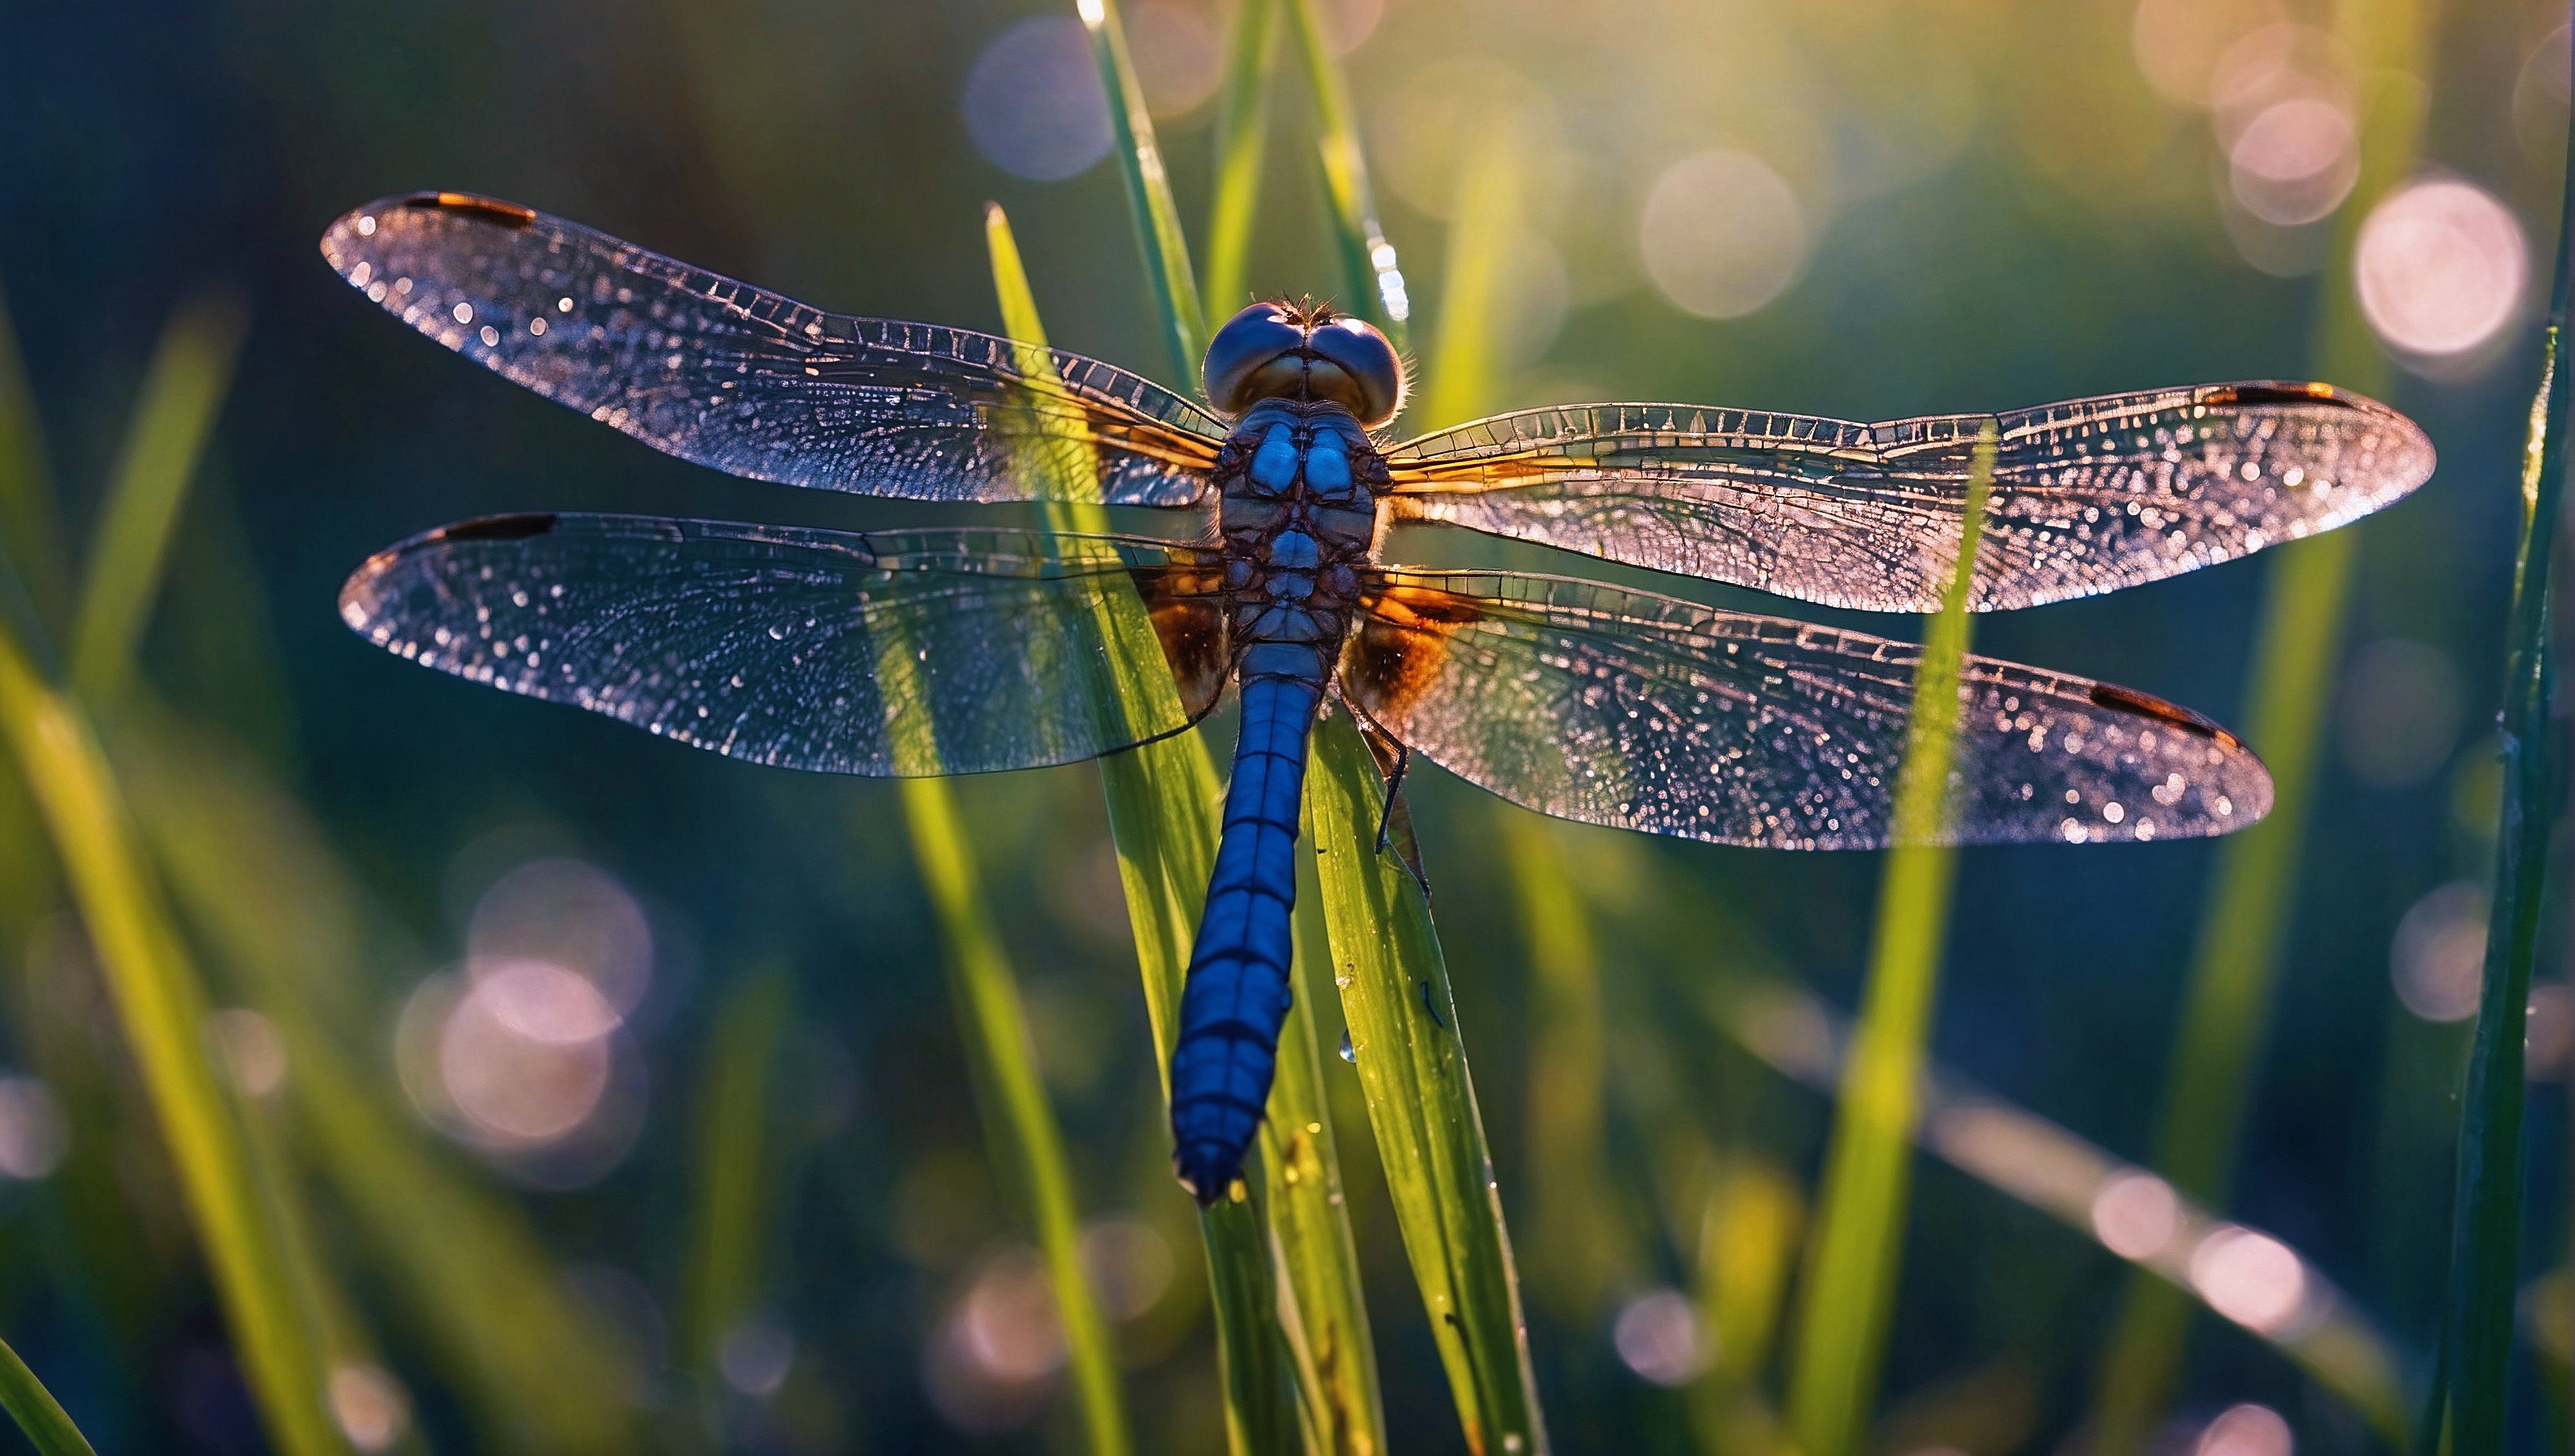 Free photo Close-up of a blue dragon fly on a blade of grass